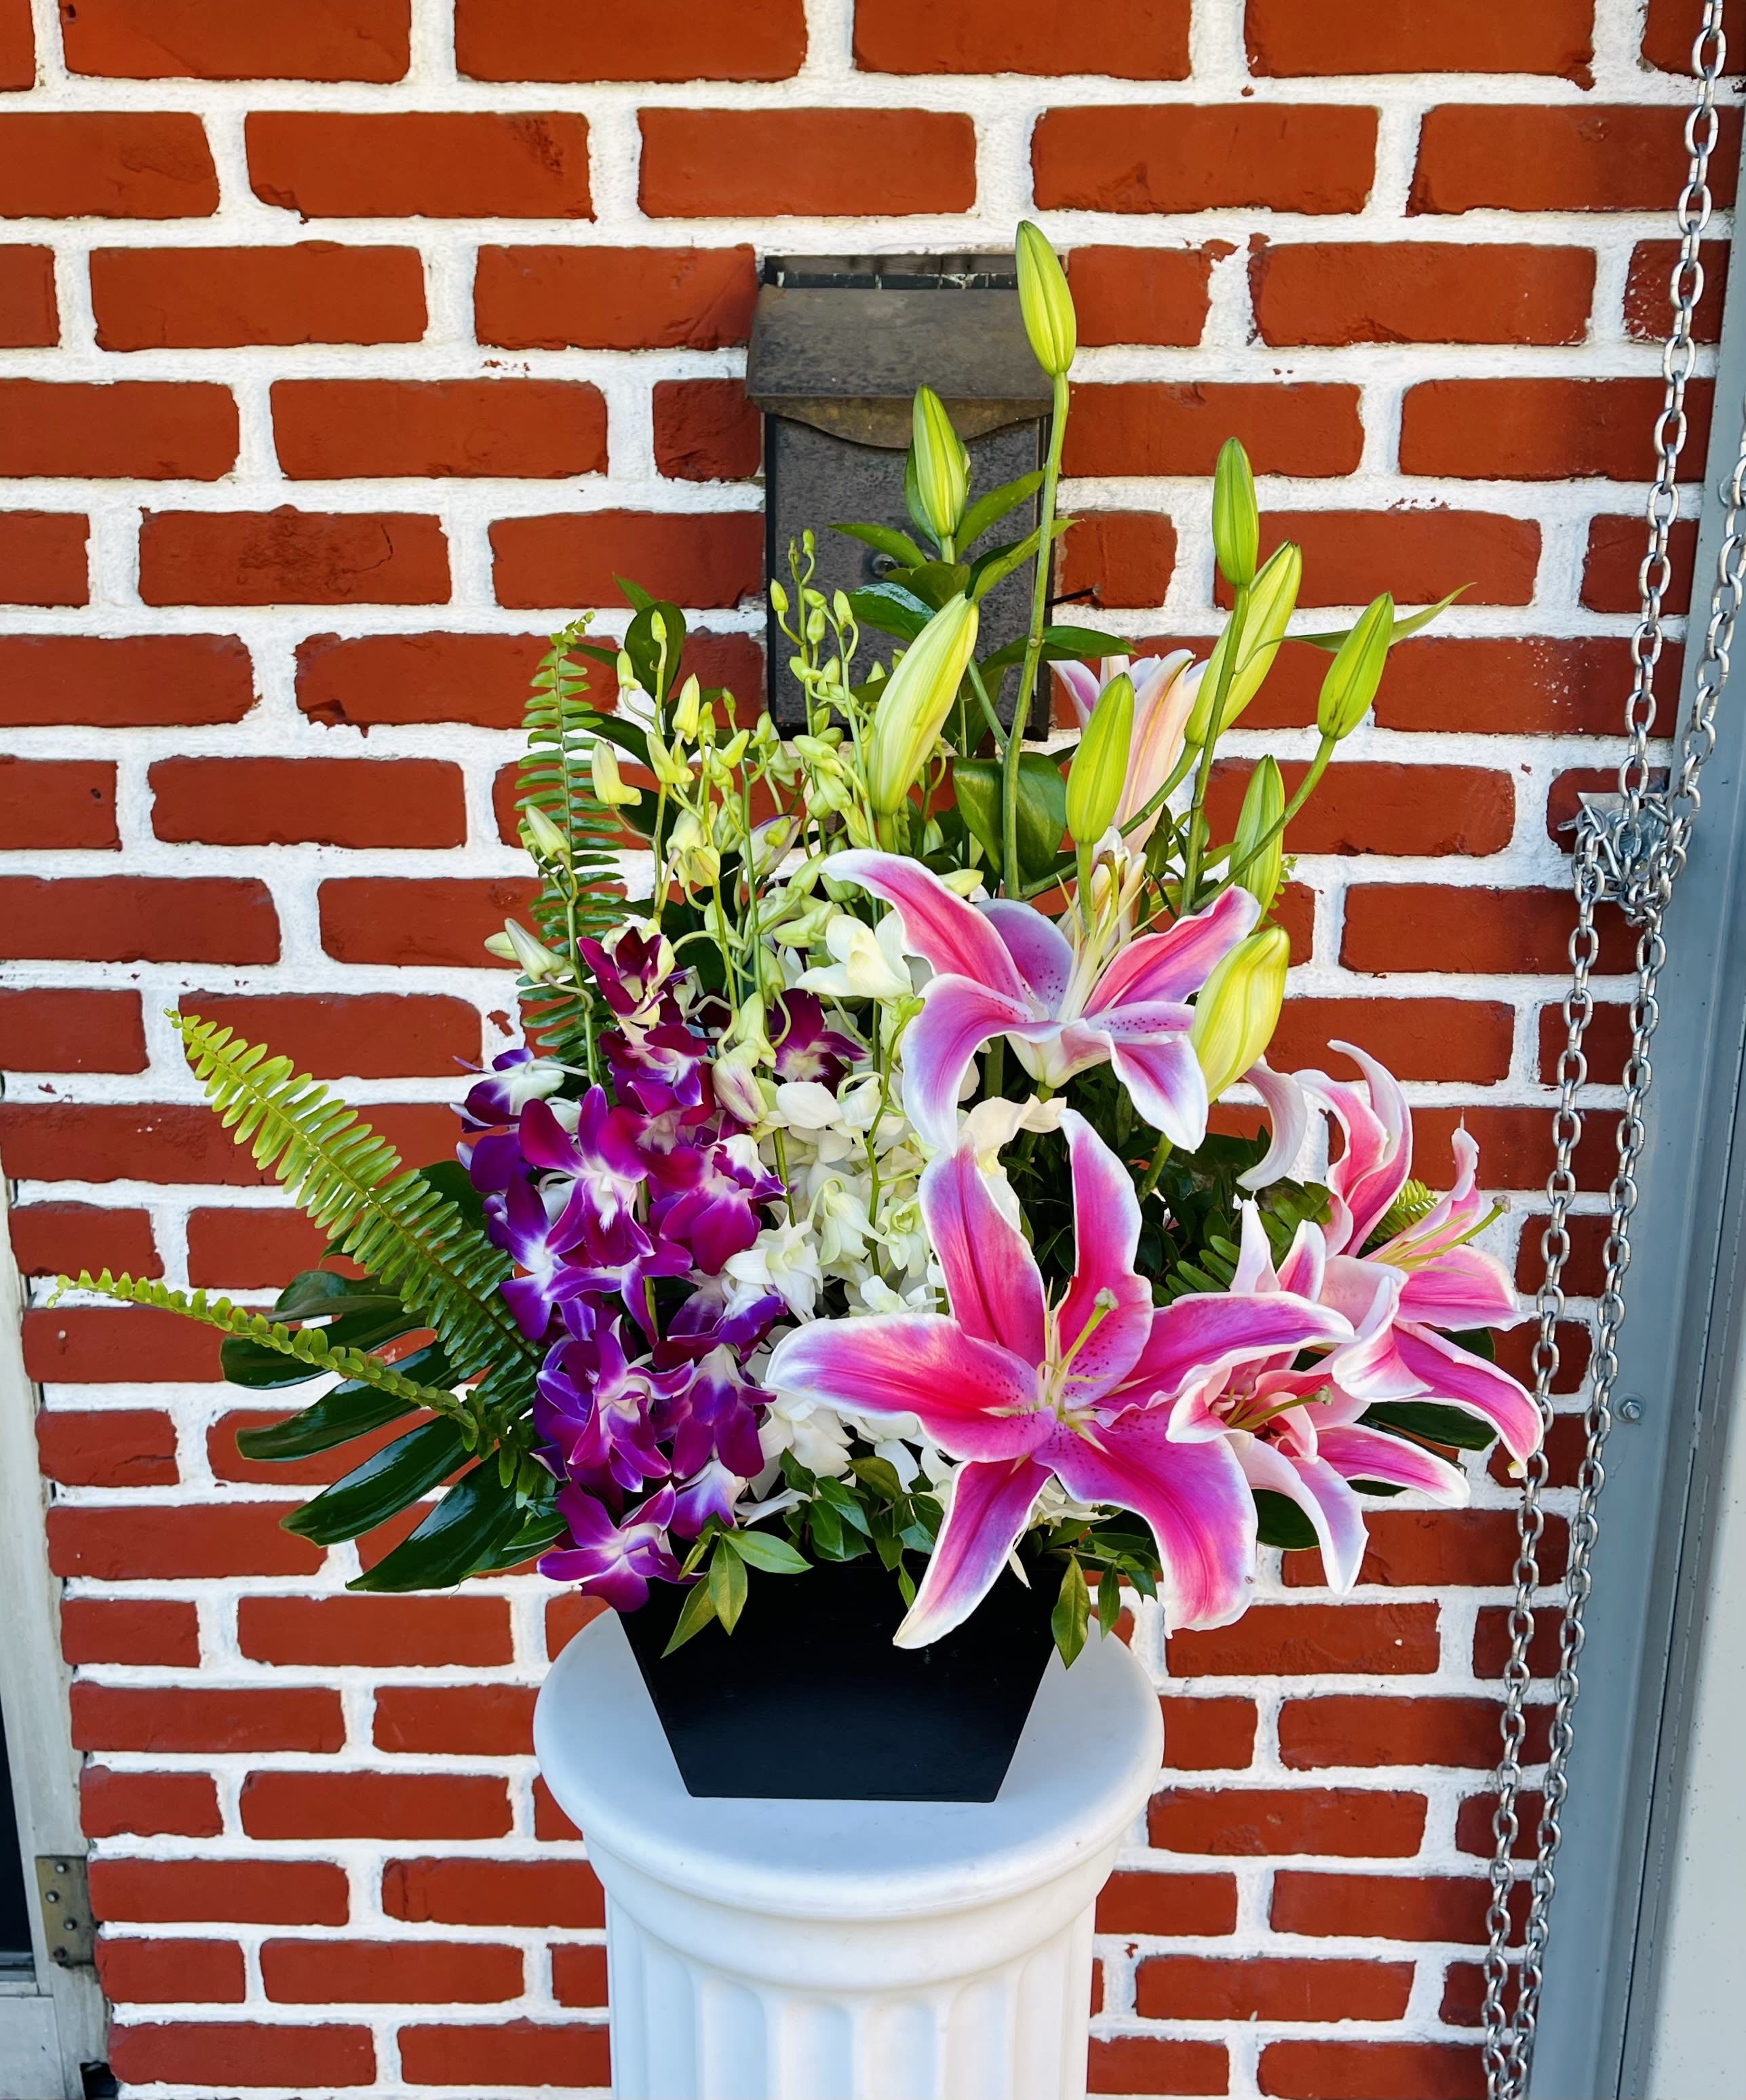 Tropical Orchid Lily Basket - A bright arrangement of purple and white orchids, pink stargazer lilies, and tropical greens.  Our florists hand-design each arrangement to be as fresh as possible, so colors and varieties may vary due to availability.